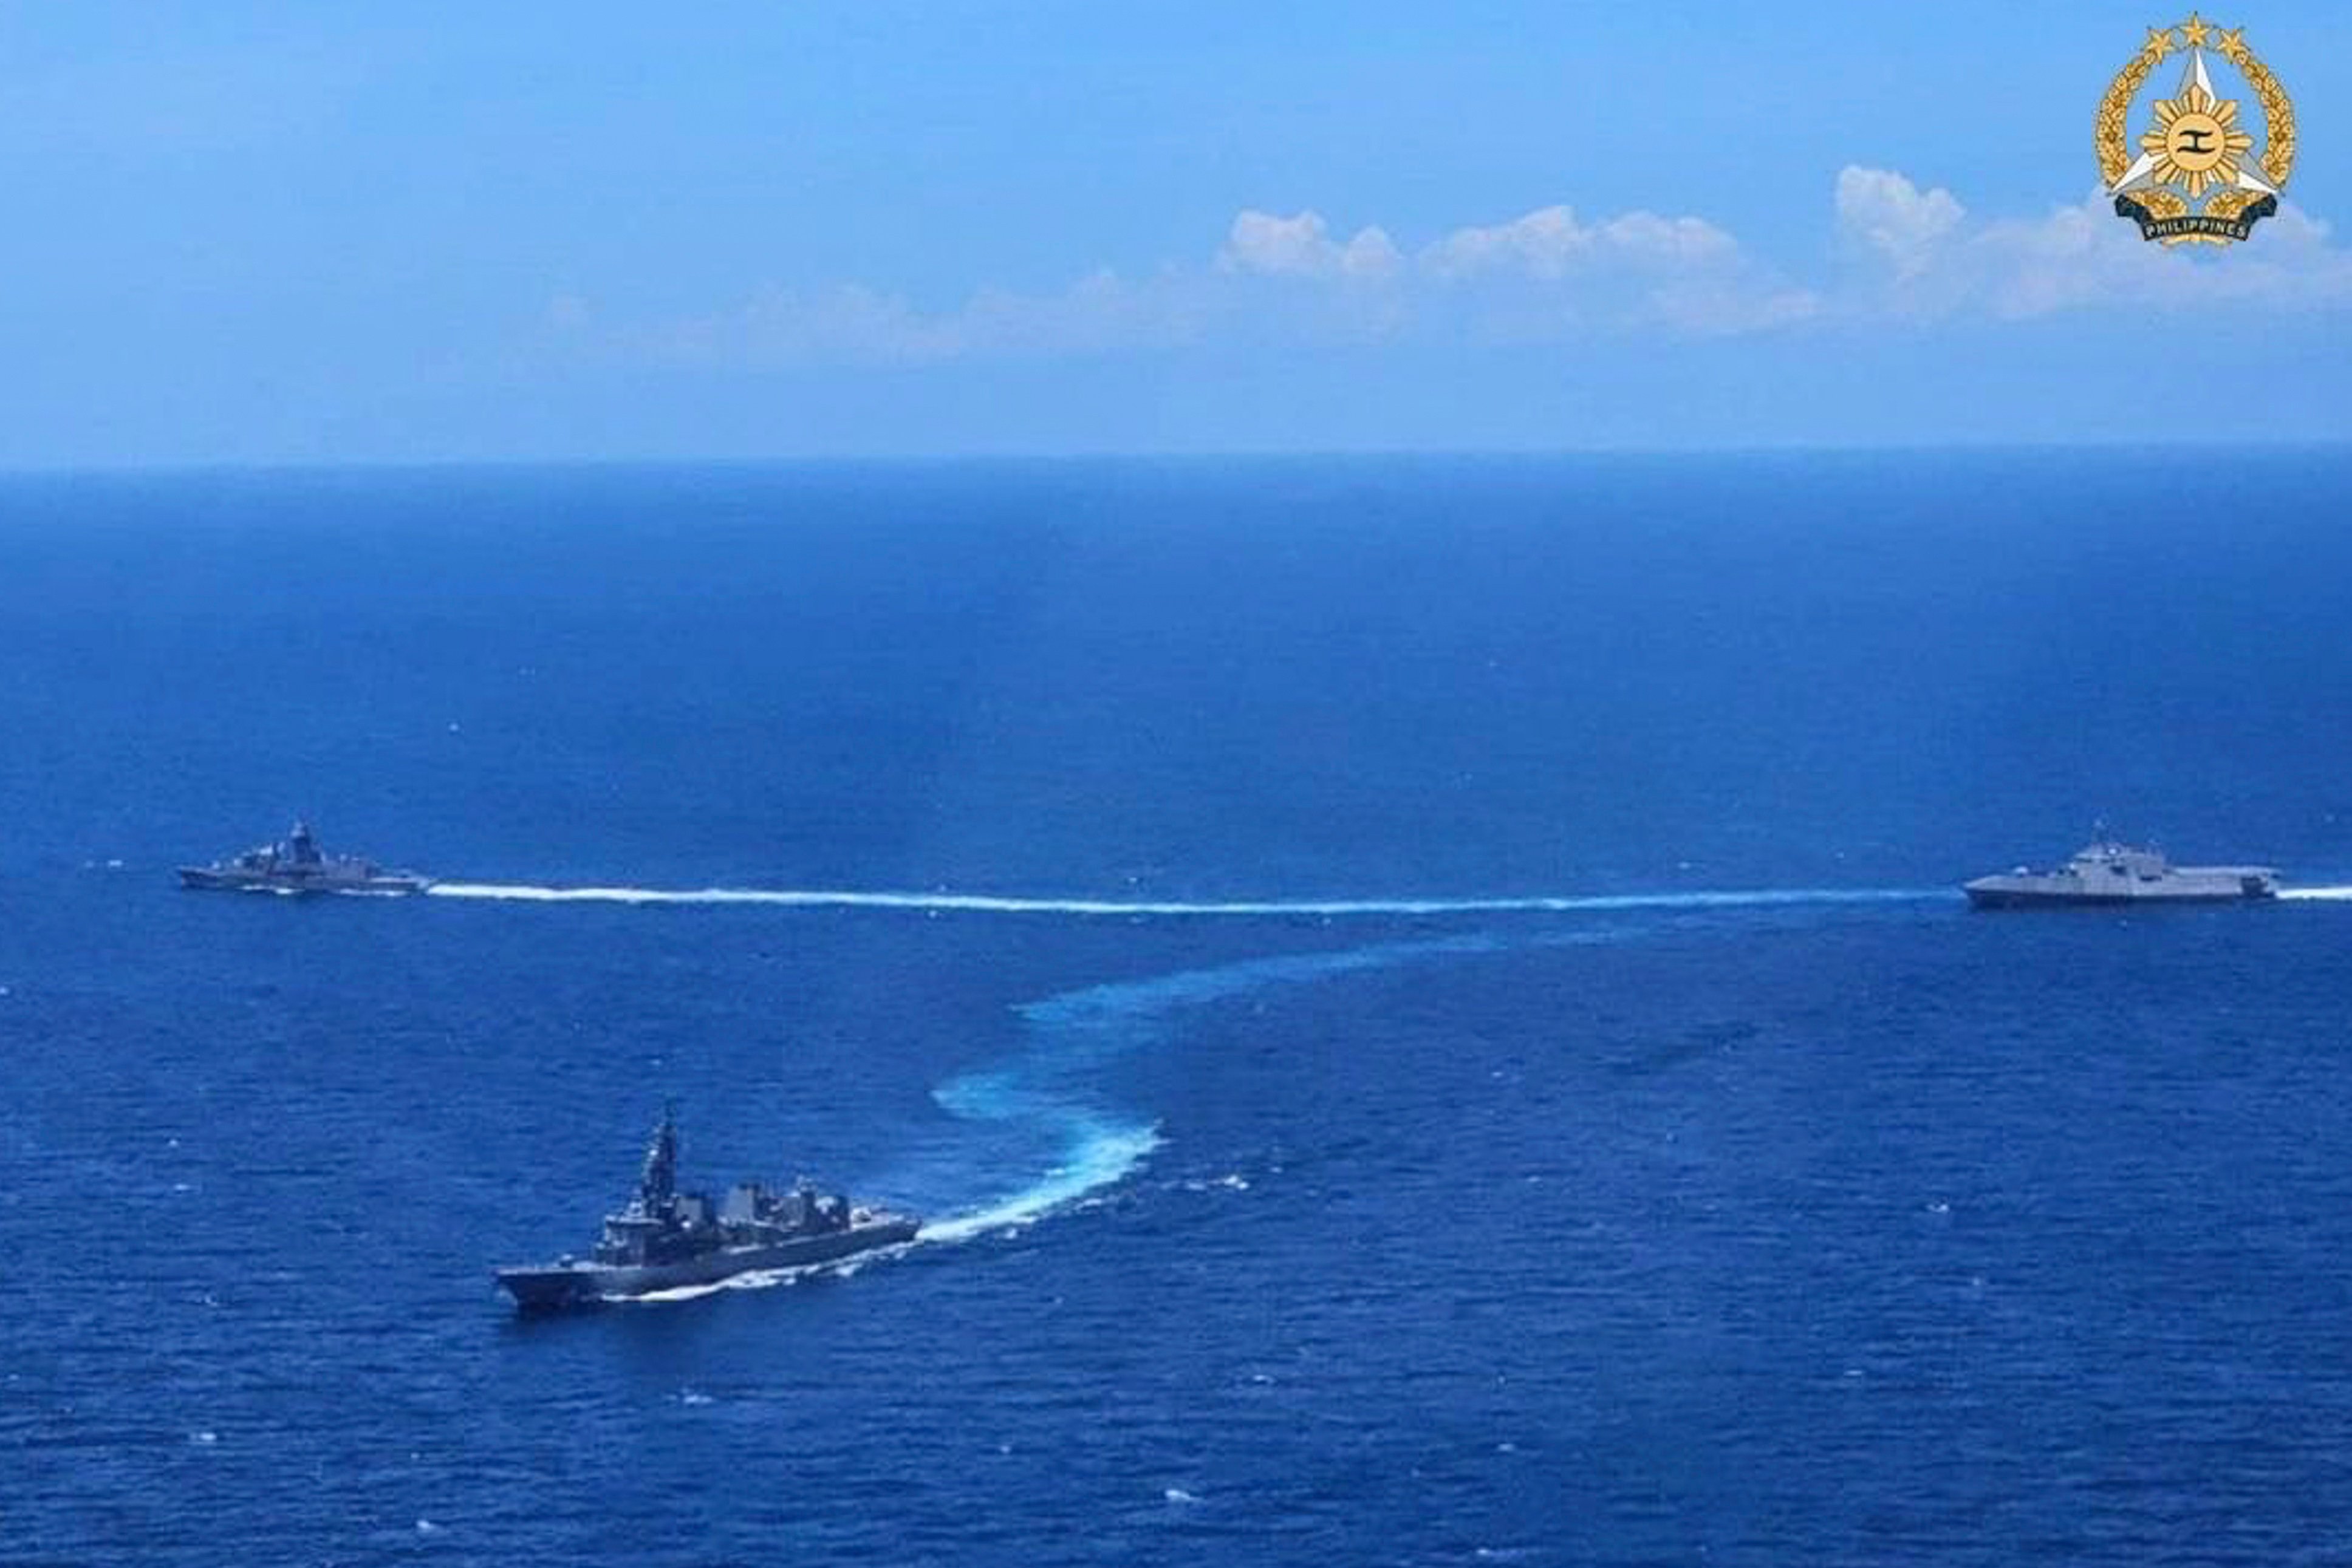 Navy ships from the US, Japan and Australia take part in the first multilateral maritime cooperative activity at the disputed South China Sea on April 7. Photo: Armed Forces of the Philippines via AP